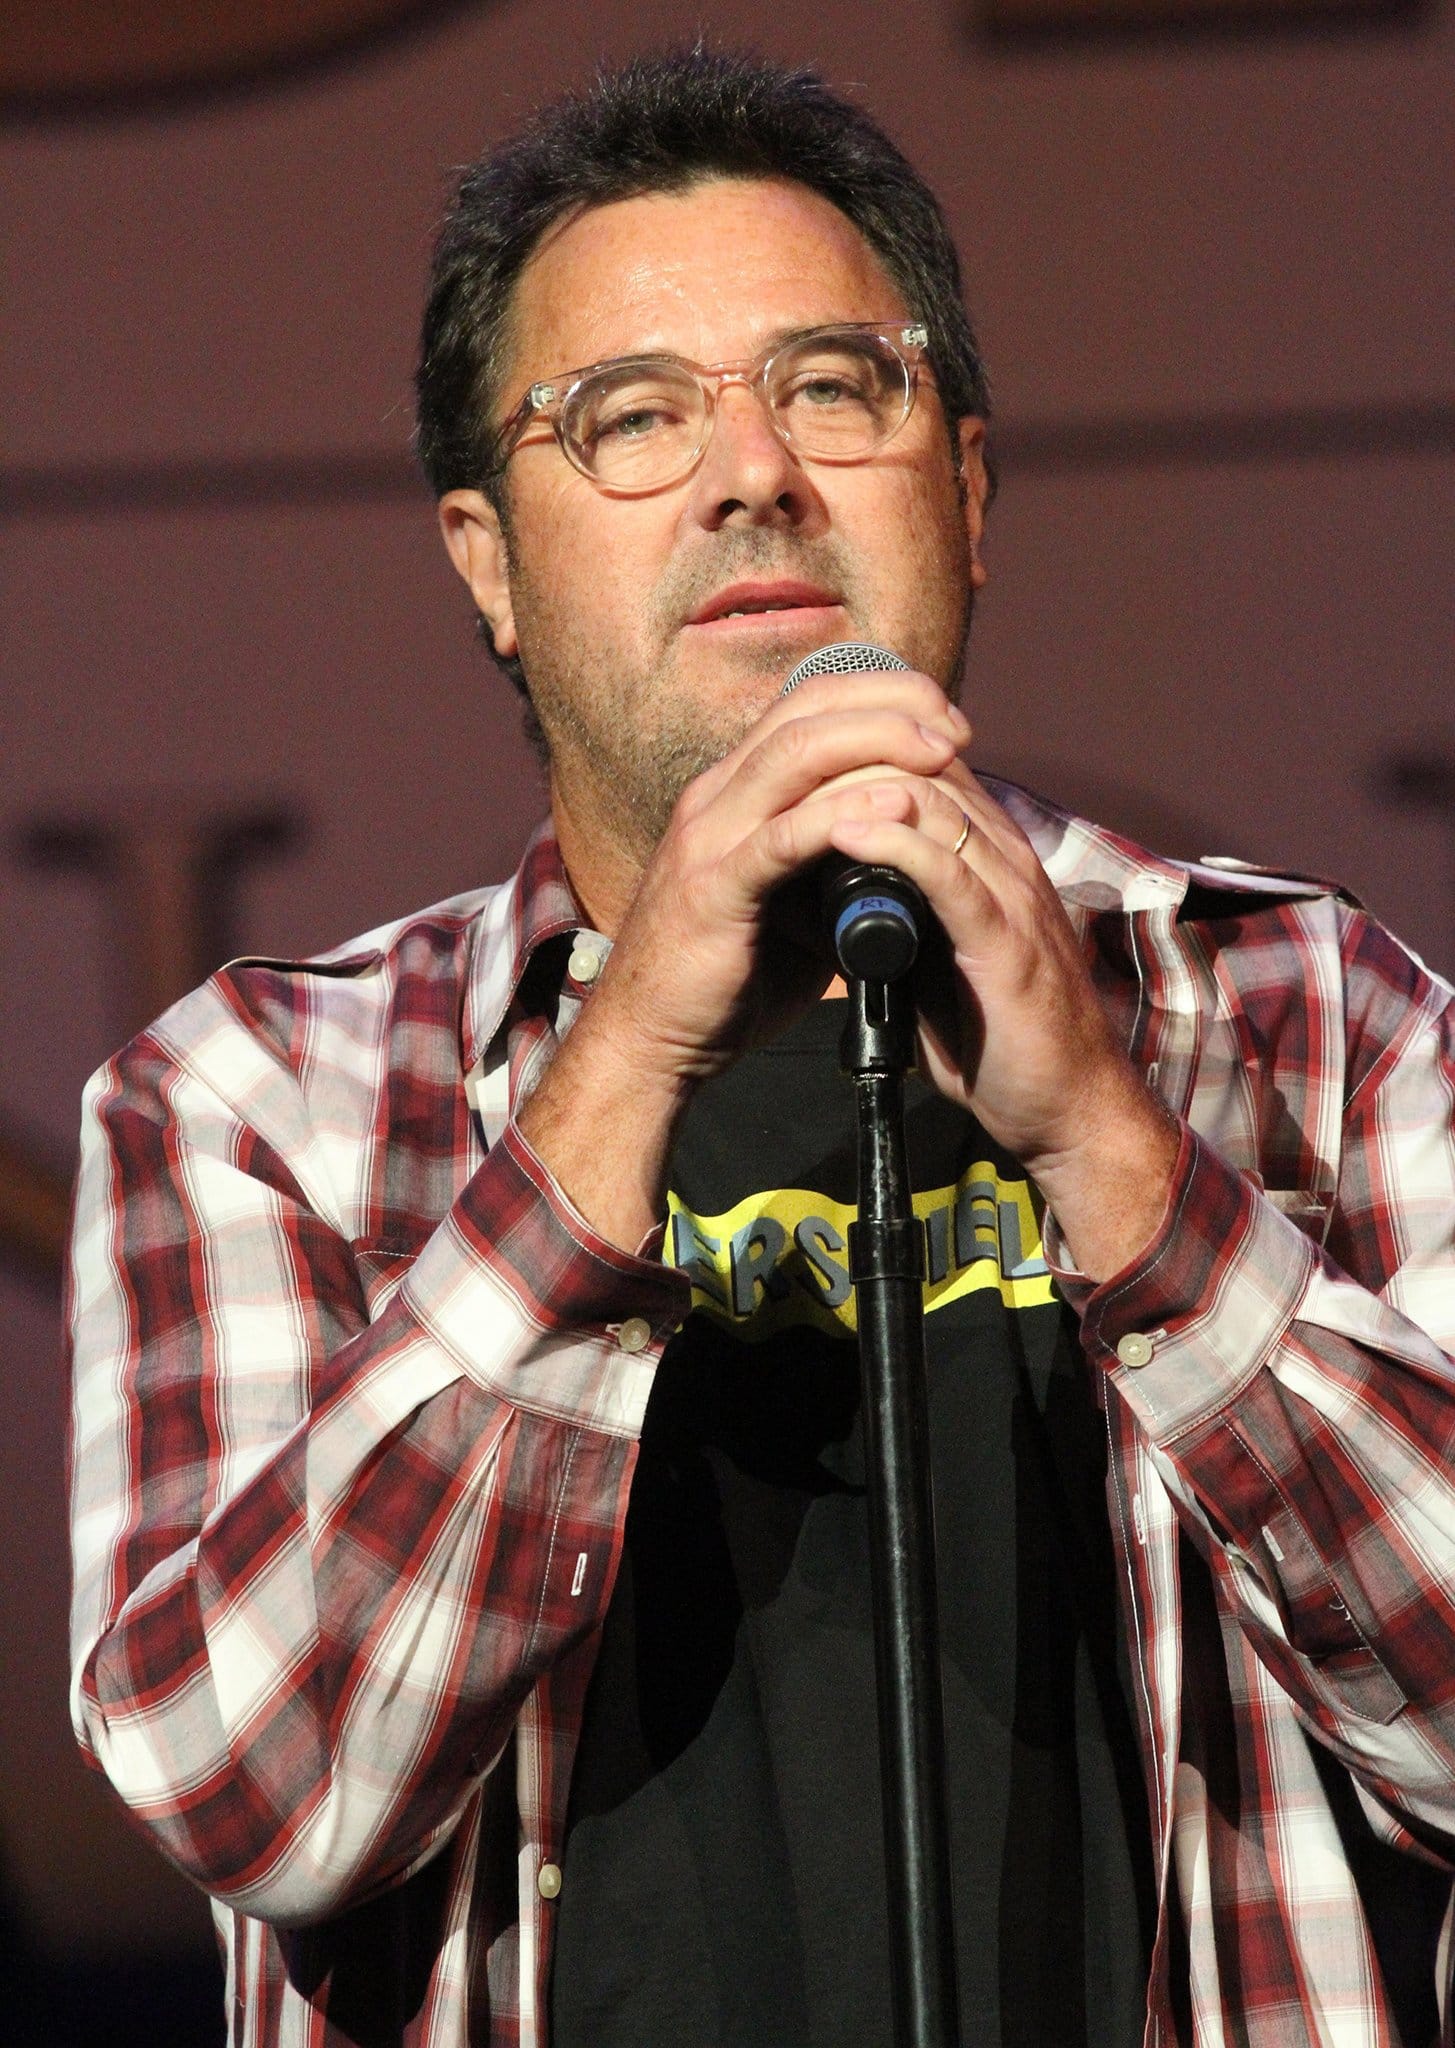 Vince Gill has been inducted into the Country Music Hall of Fame in 2007 and has earned 22 Grammys and 18 CMA awards throughout his career